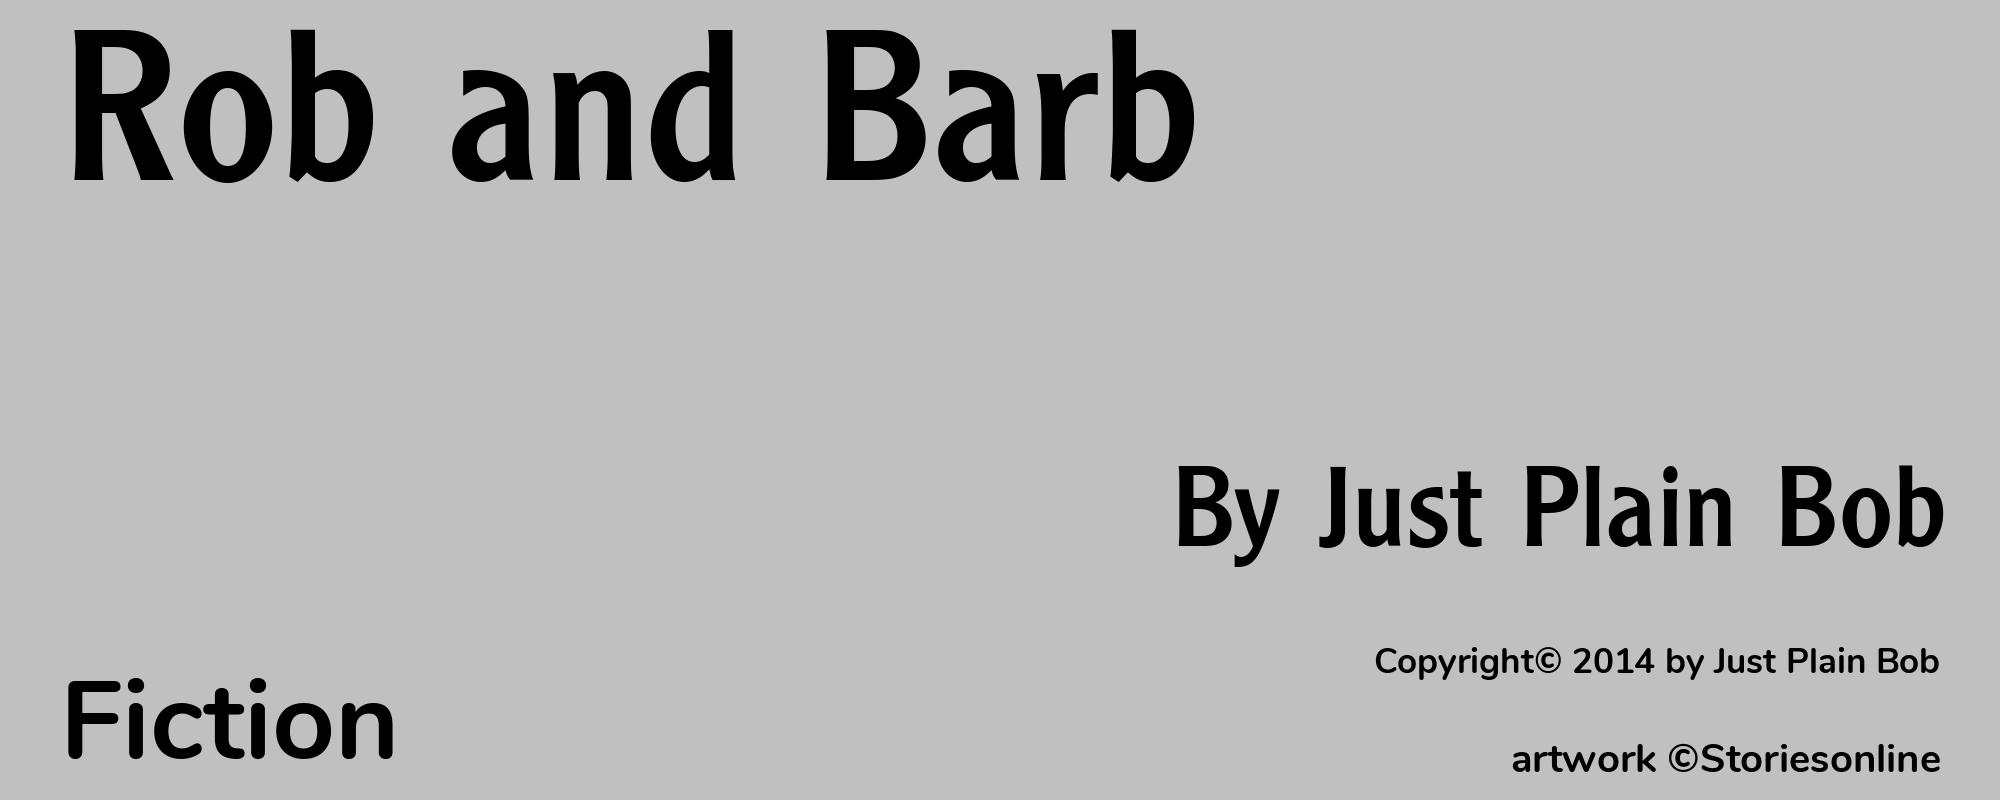 Rob and Barb - Cover